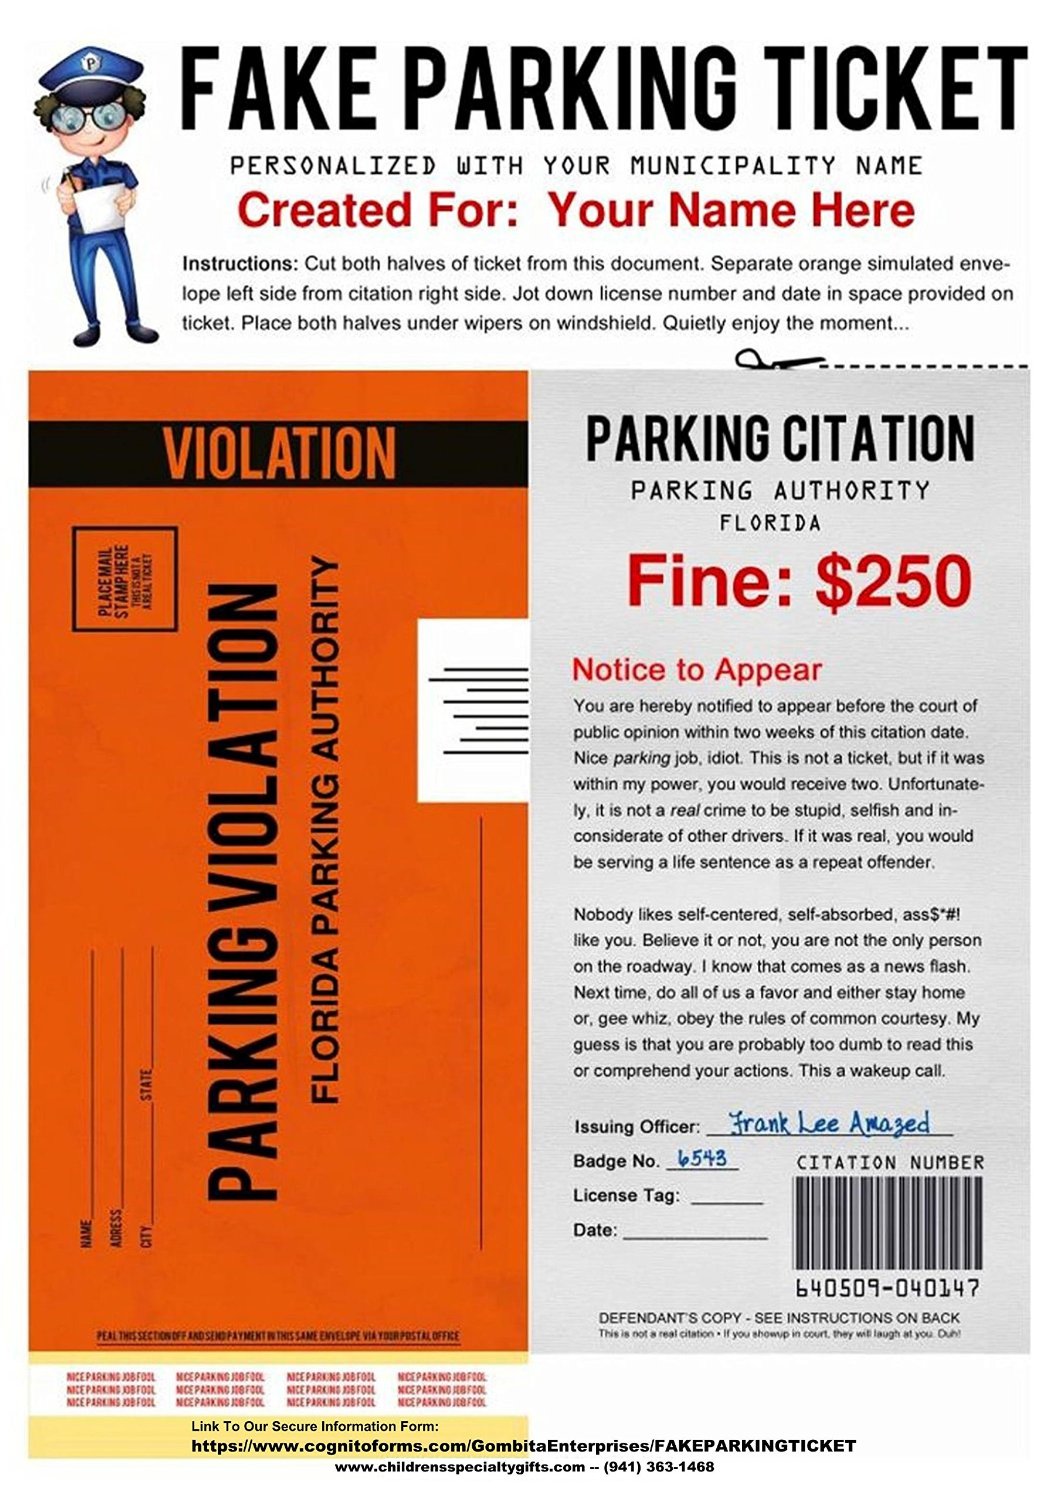 Fake Parking Ticket  5 -10 or 25  Pack Shipped By Mail